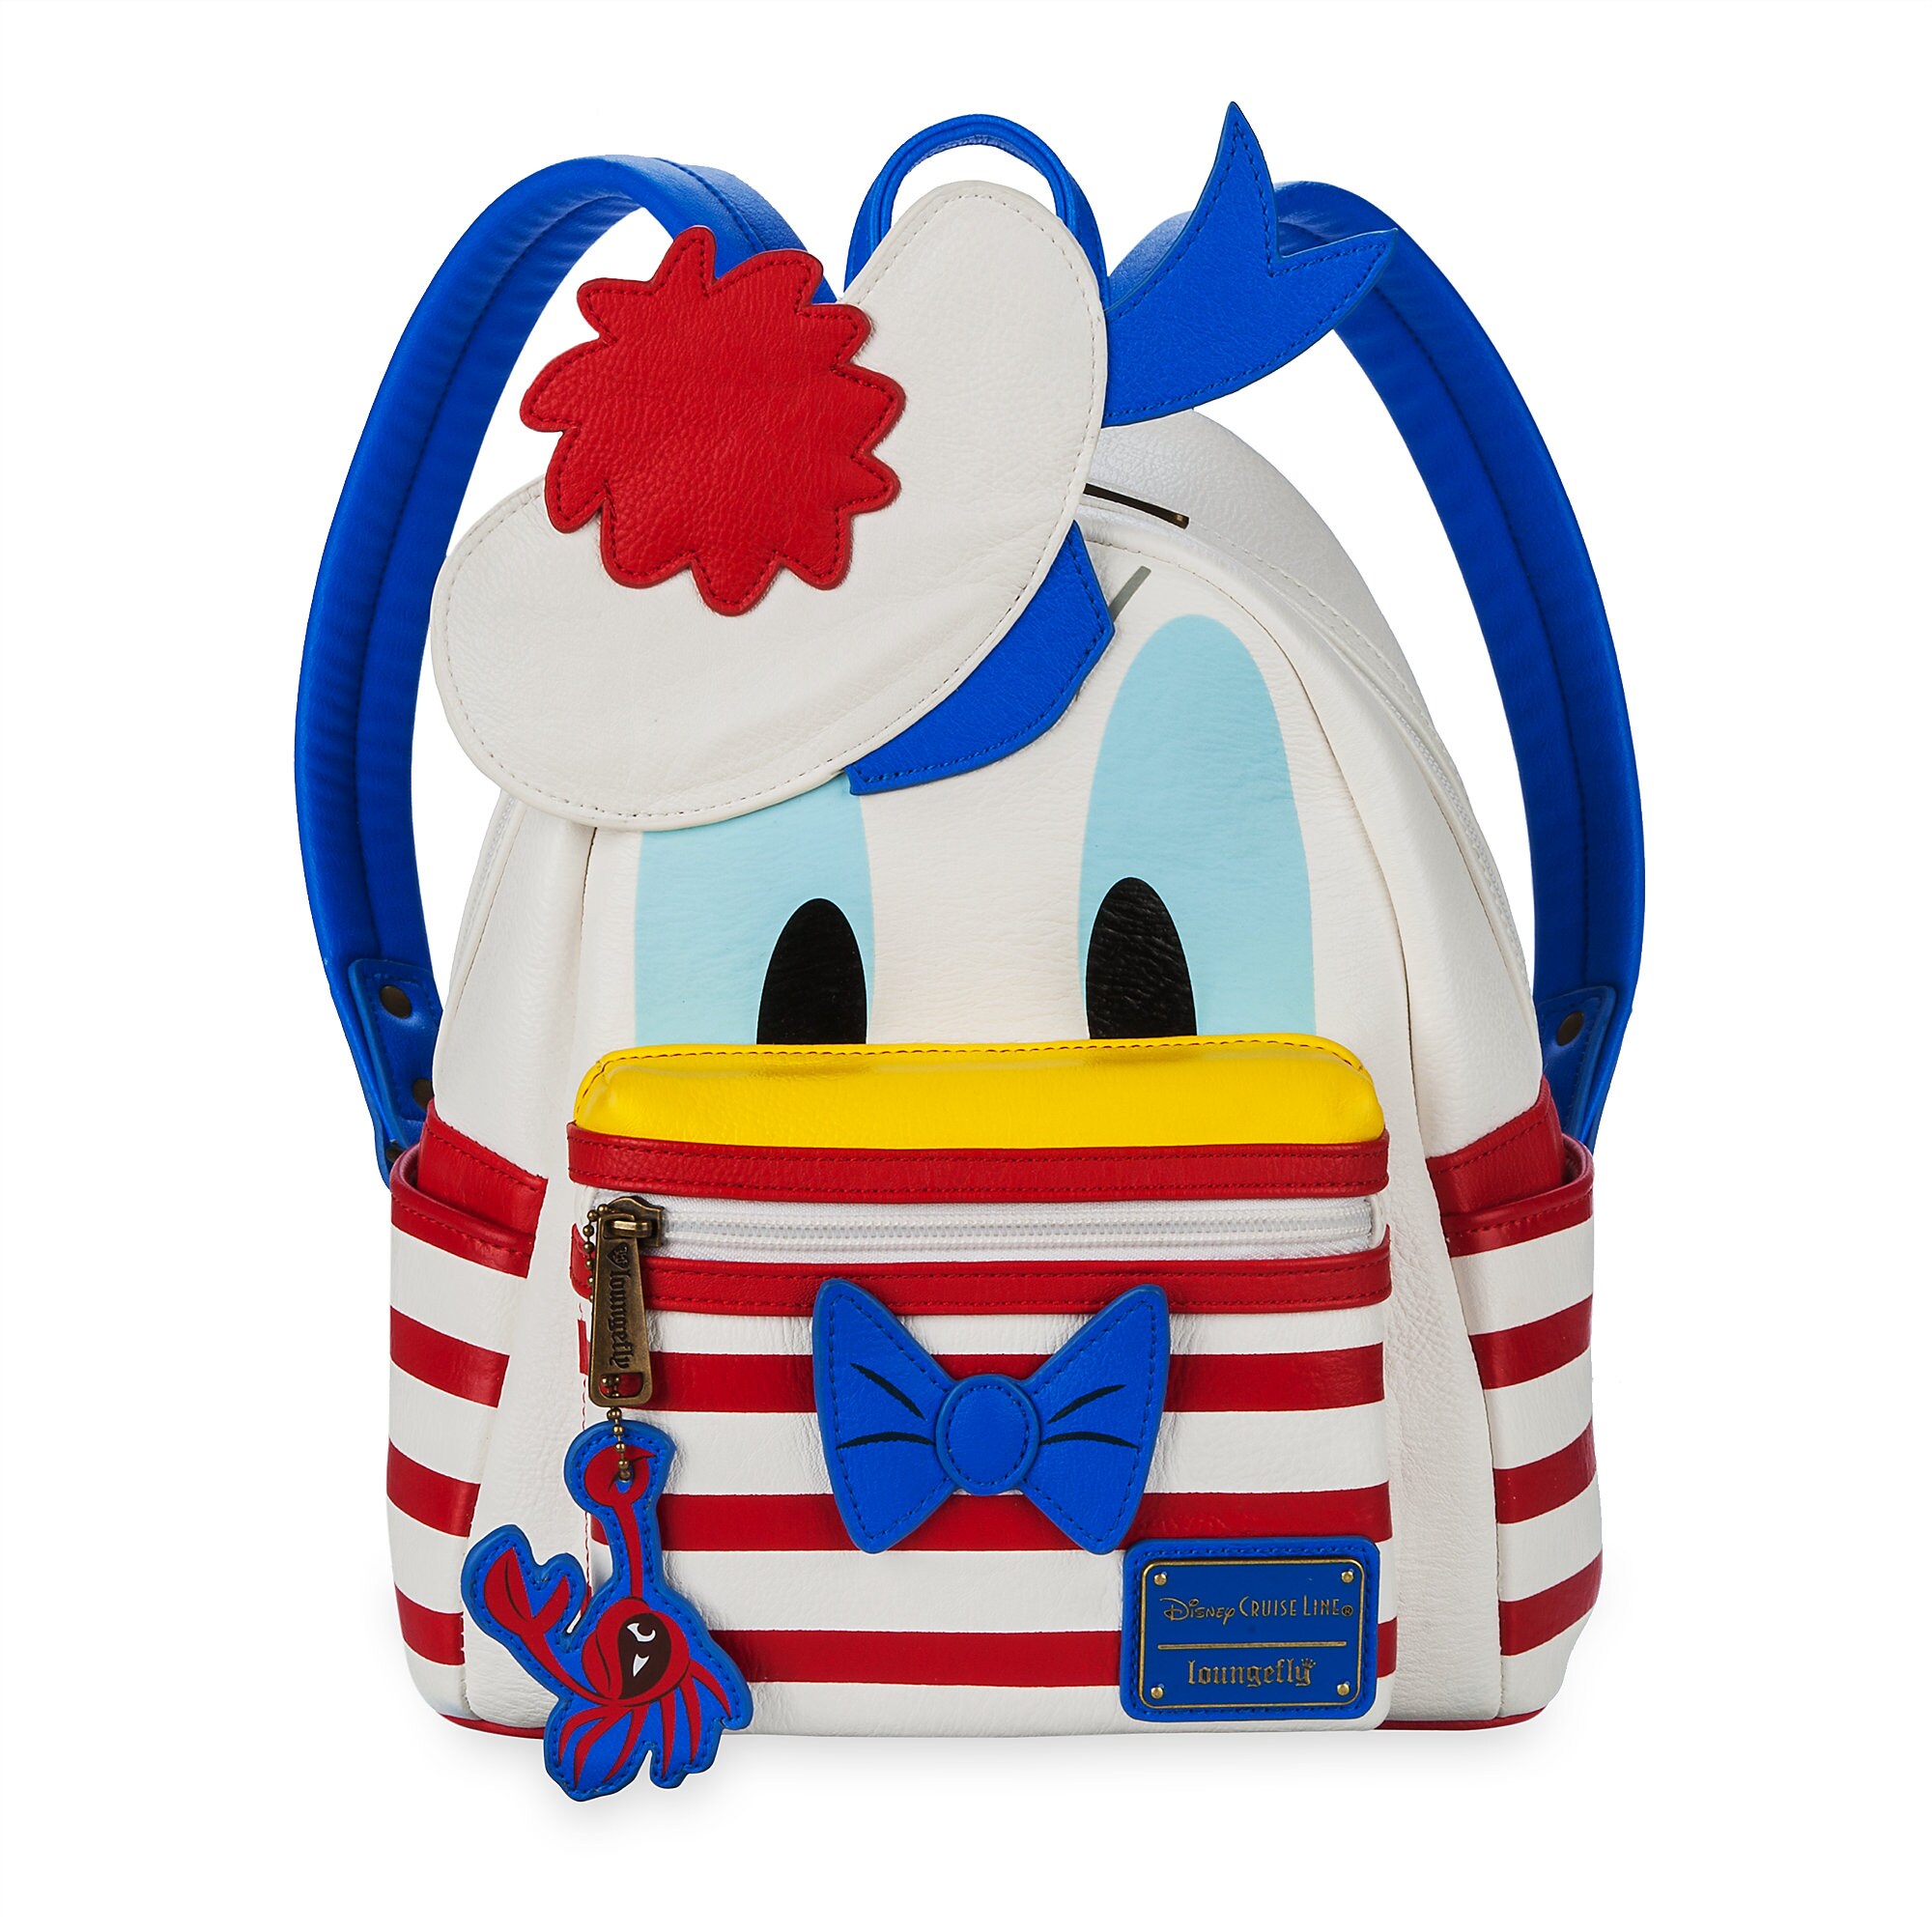 Donald Duck Disney Cruise Line Mini Backpack by Loungefly available